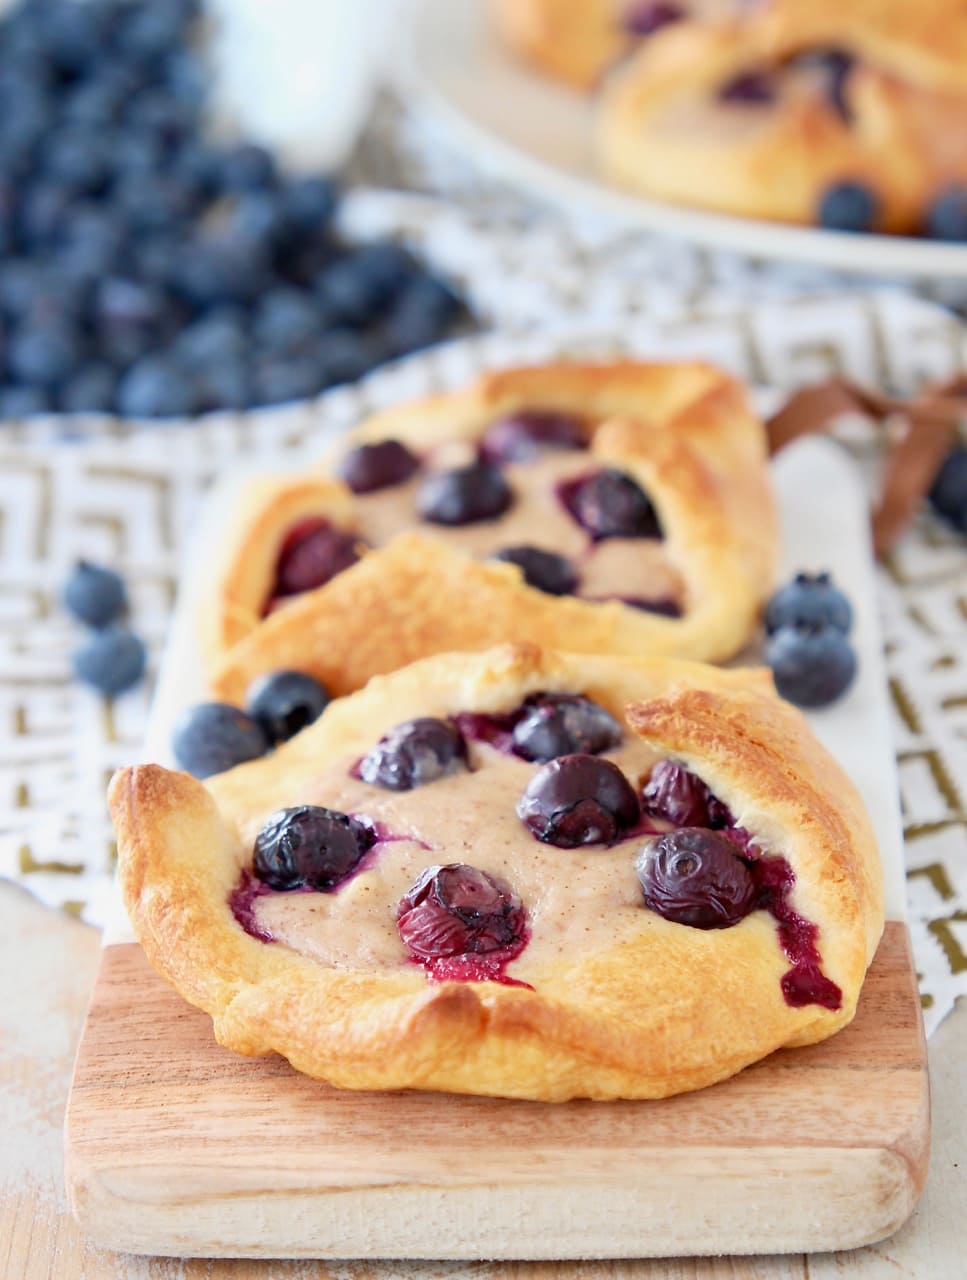 Blueberry pastry made with crescent roll dough, sitting on wood and marble cutting board with fresh blueberries on the side and behind